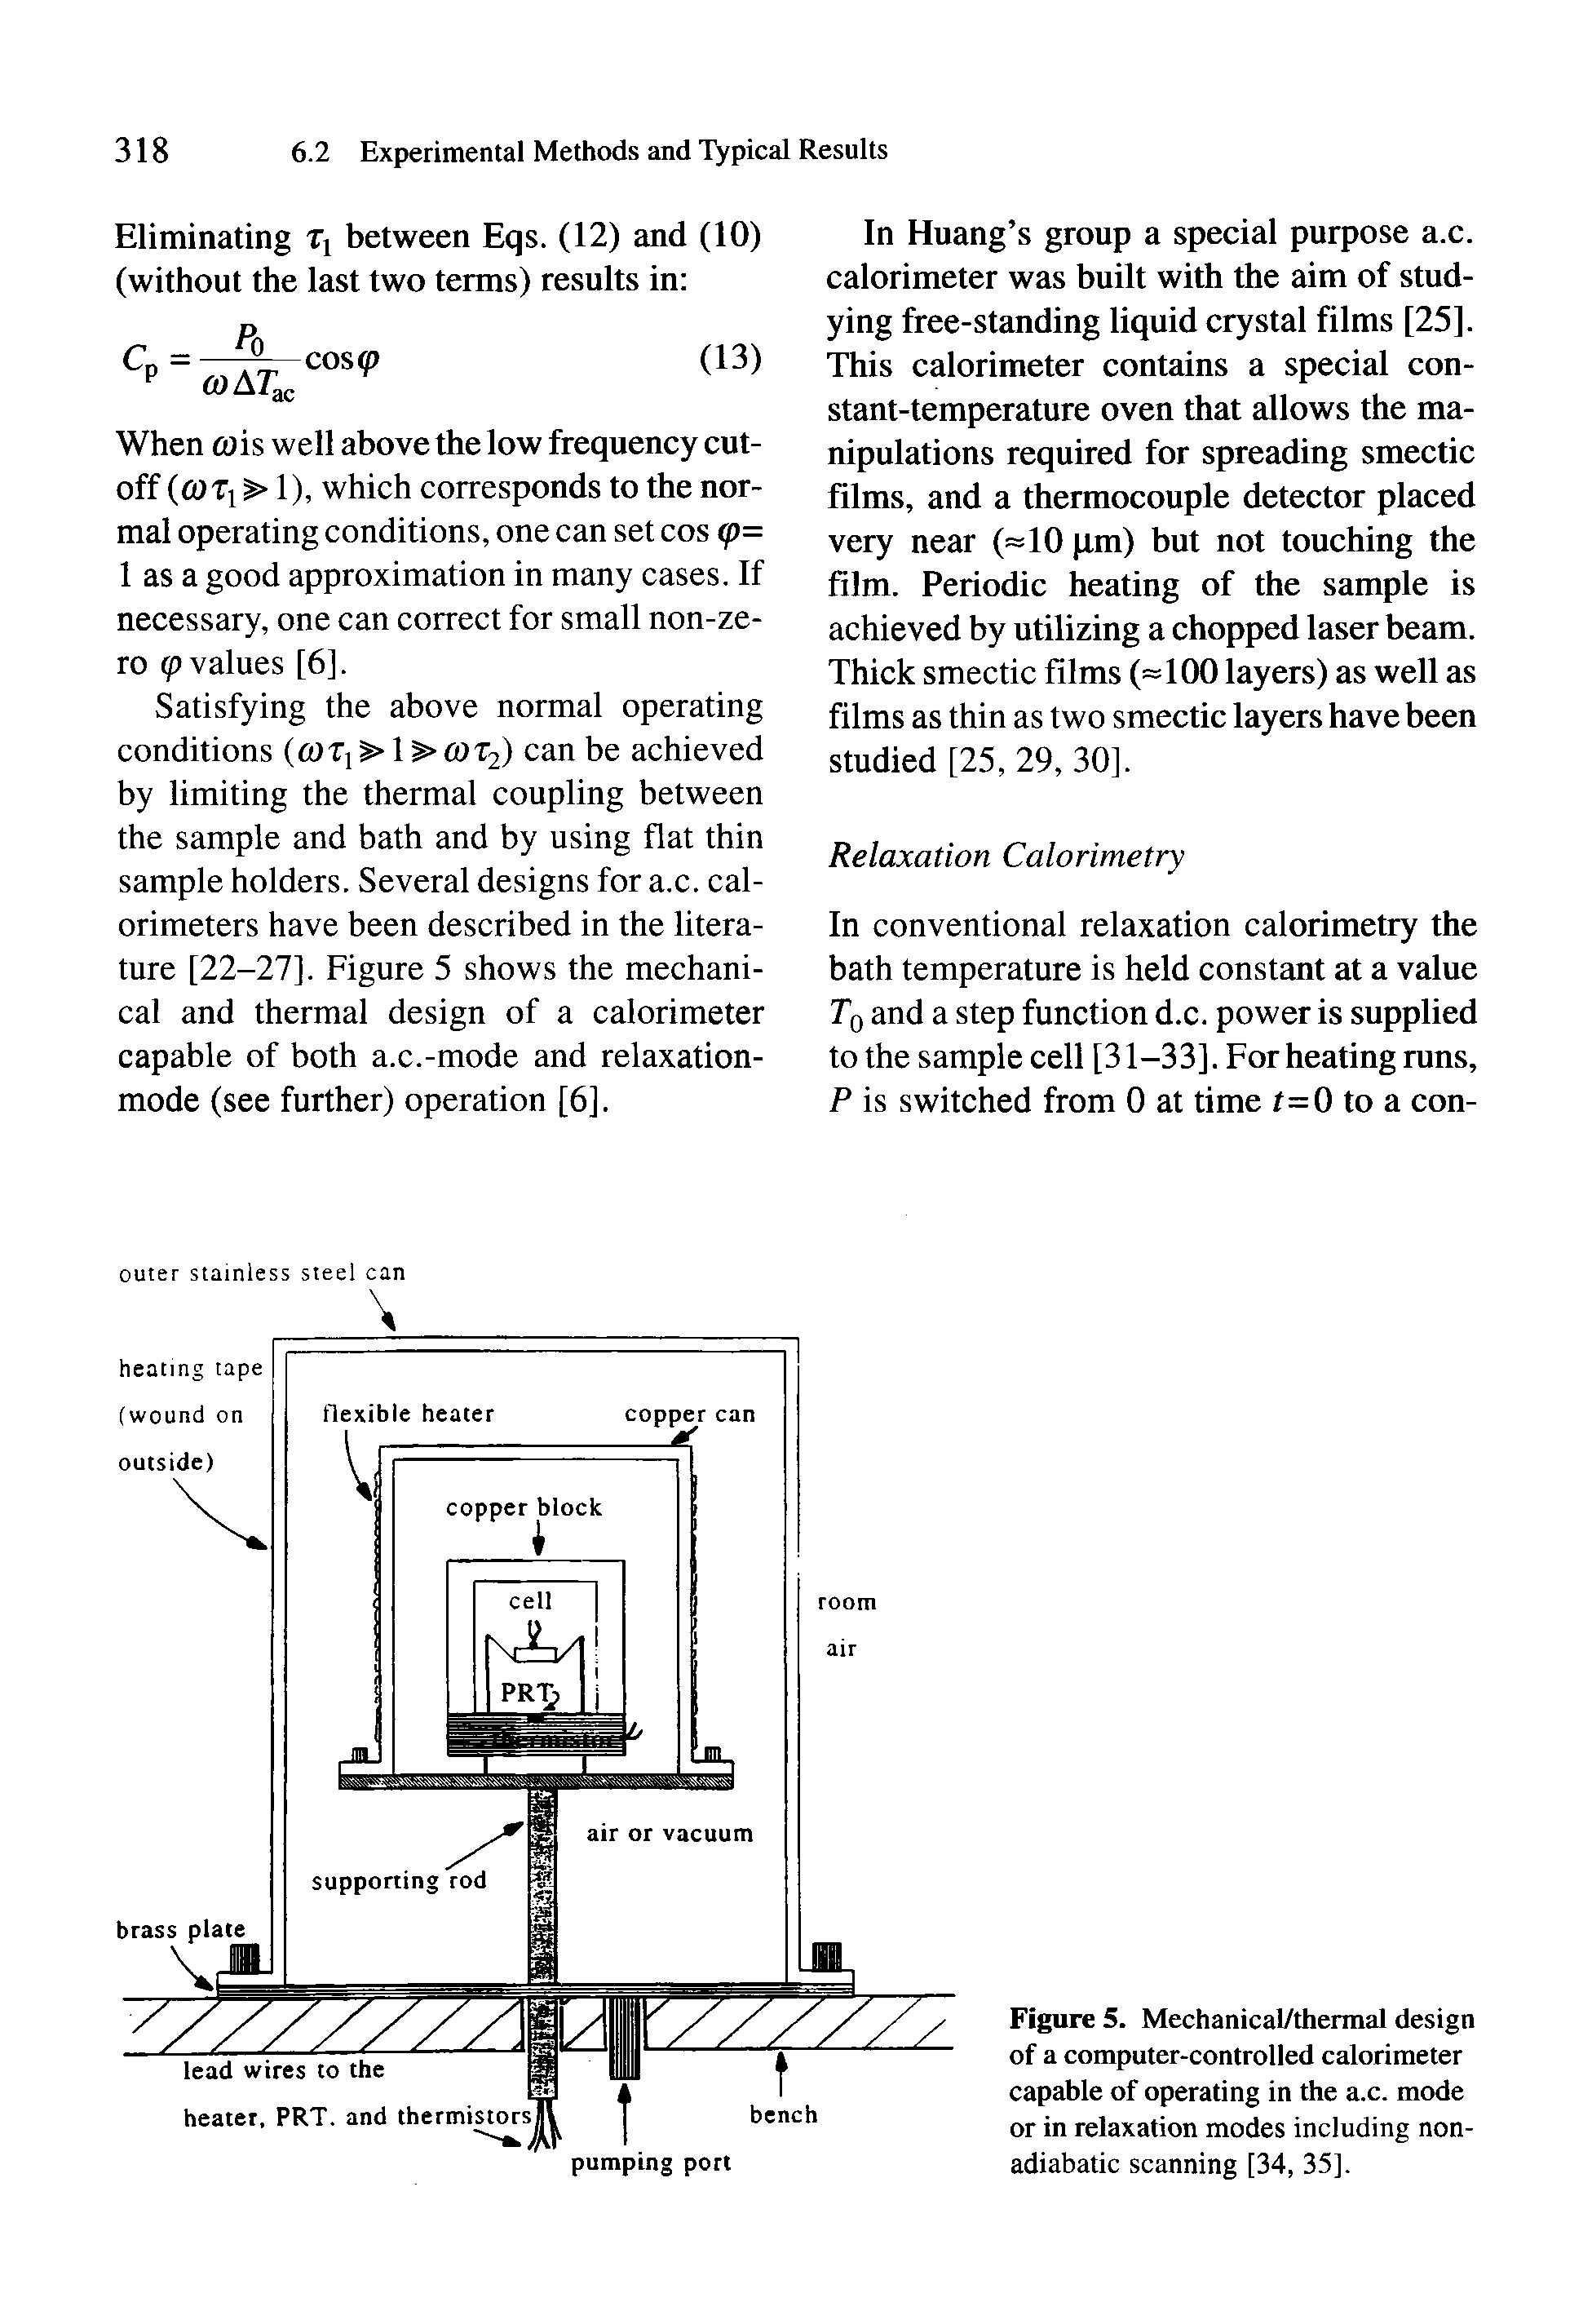 Figure 5. Mechanical/thermal design of a computer-controlled calorimeter capable of operating in the a.c. mode or in relaxation modes including non-adiabatic scanning [34, 35].